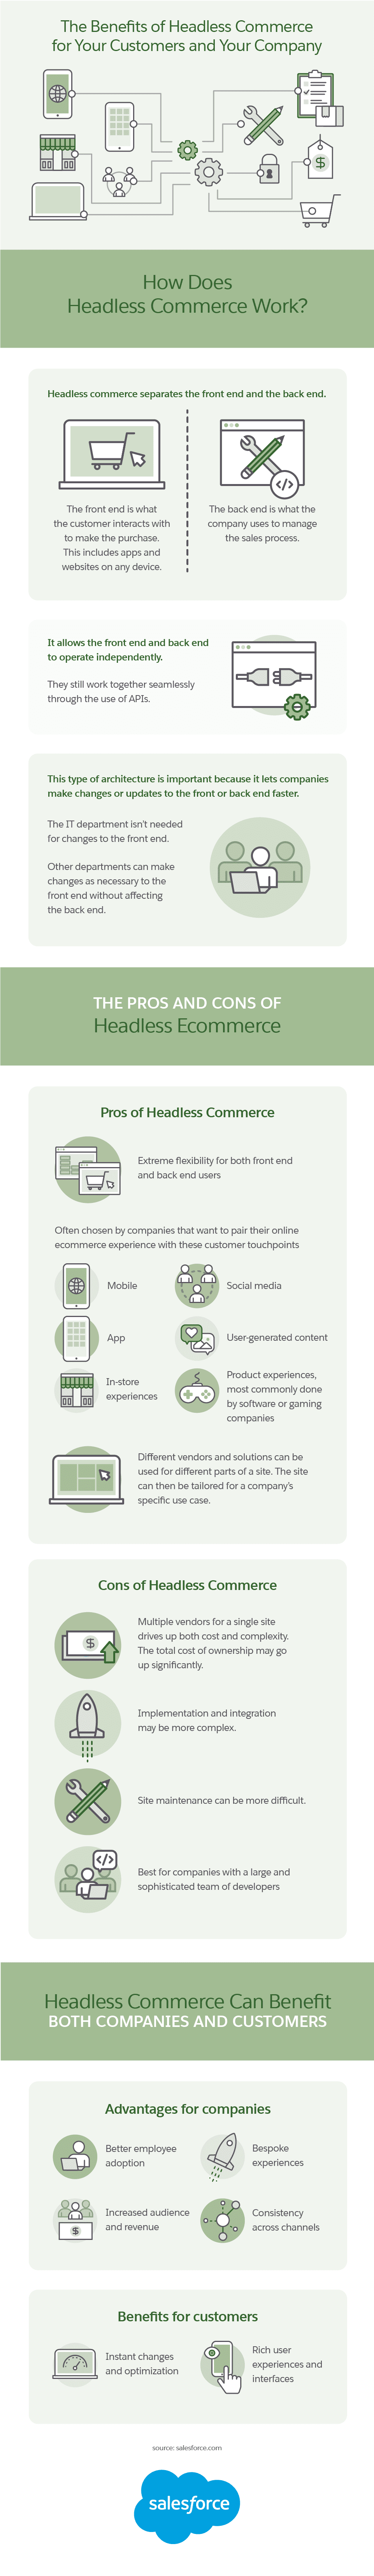 The Benefits of Headless Commerce for Your Customers and Your Company